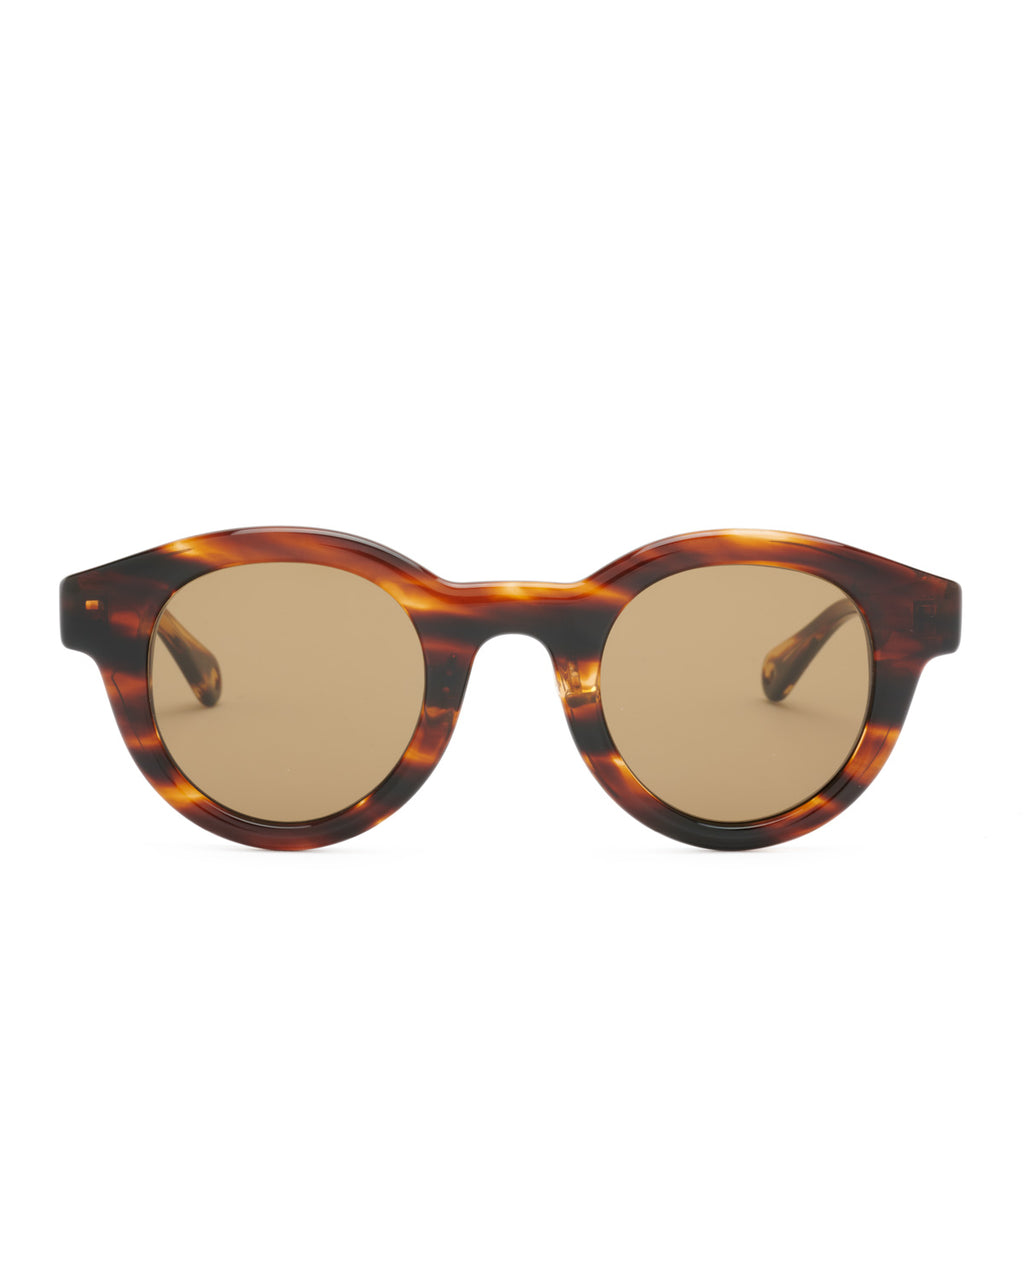 Illusion Brown Crystal & Brown Sunglasses – Common People